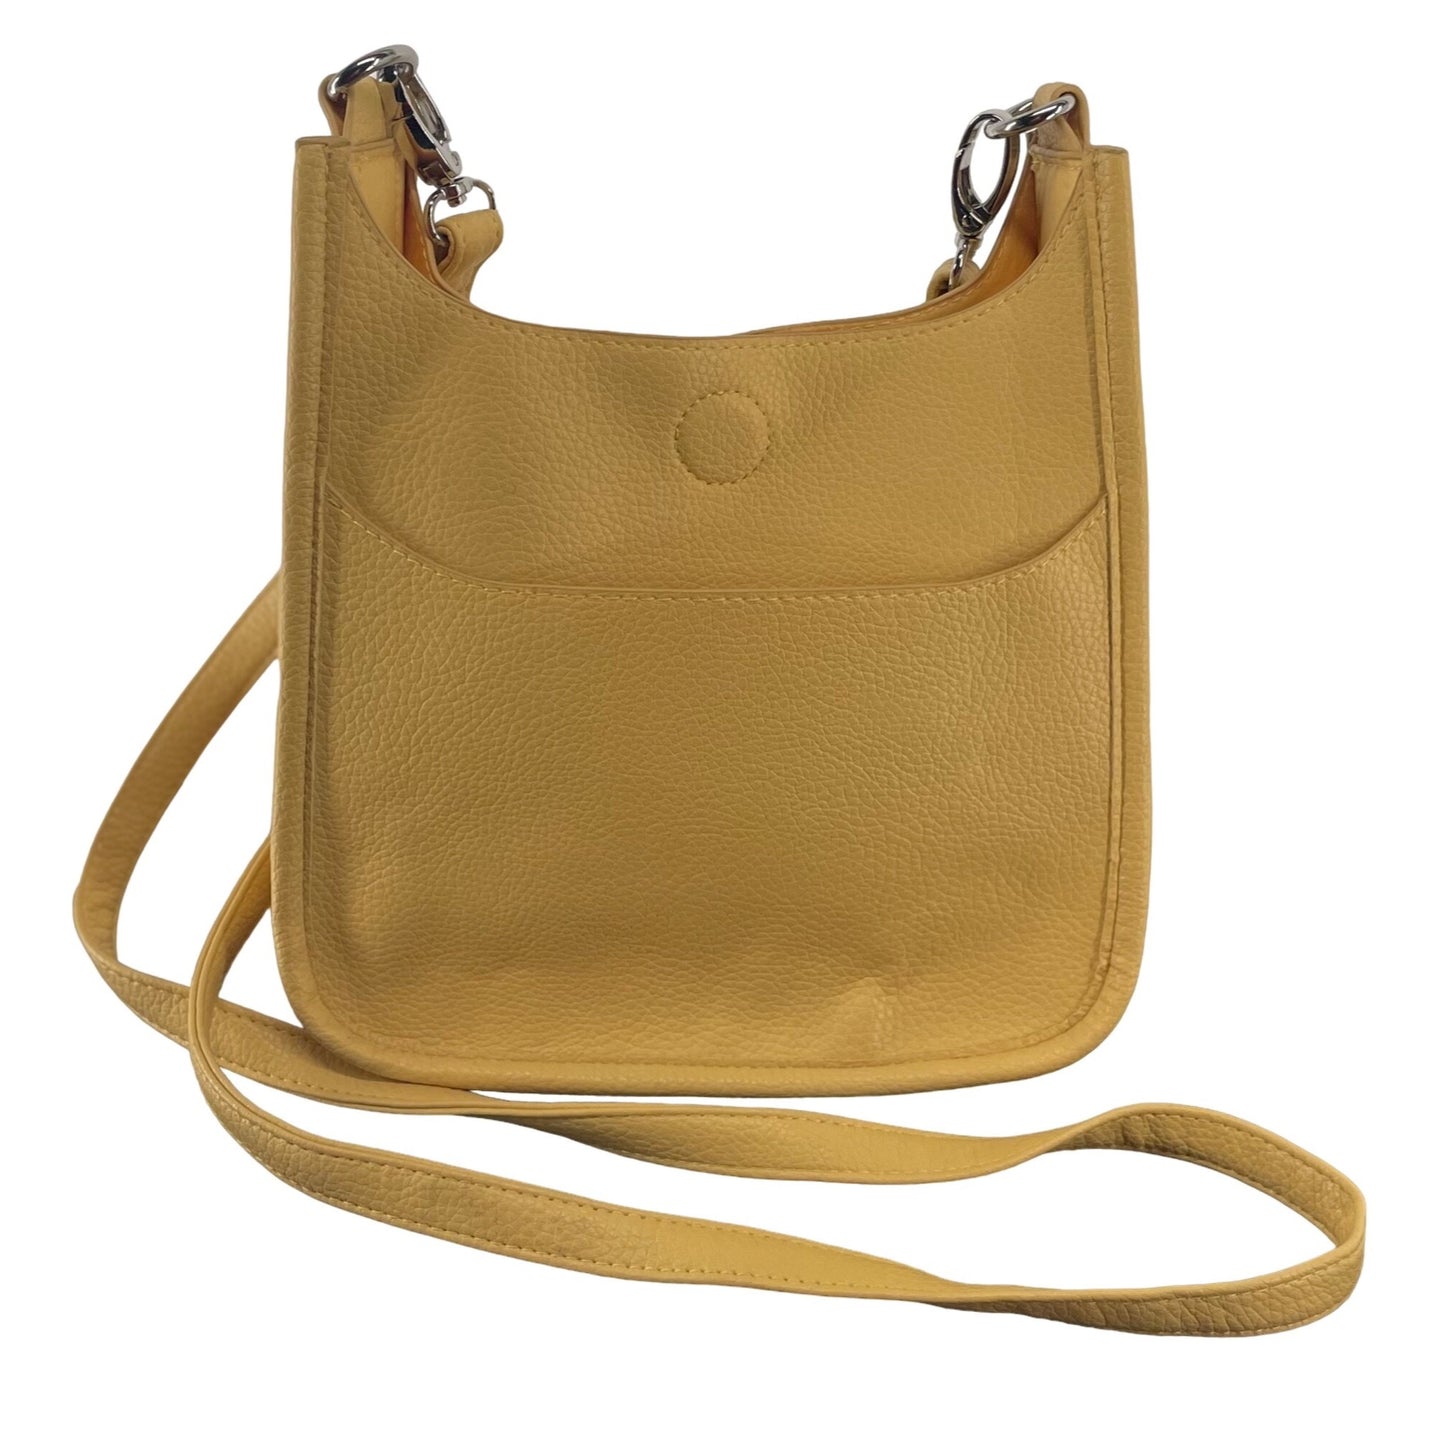 NWOT Women's Small Yellow Faux Leather Shoulder Purse